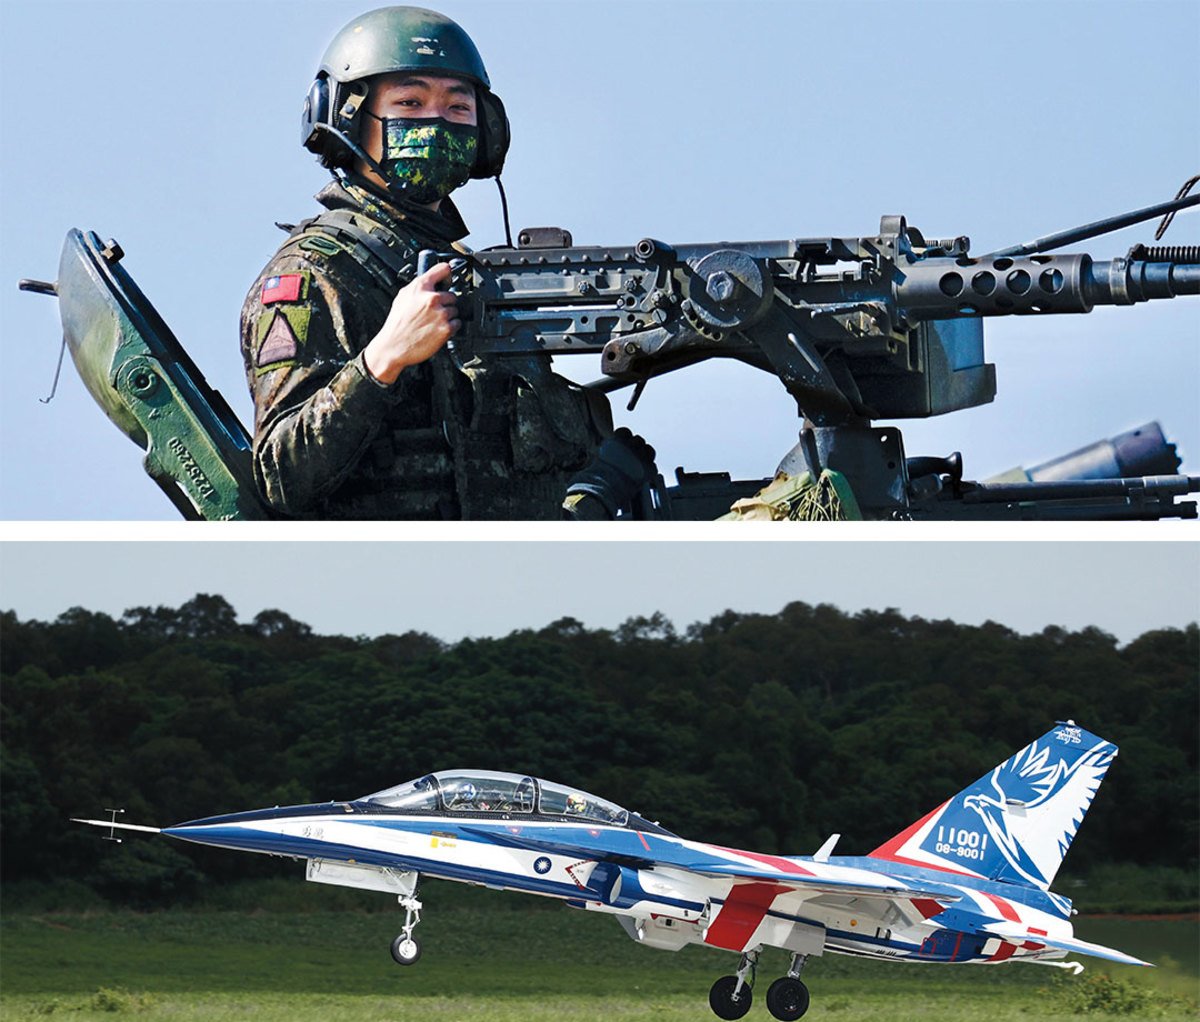 Gunner with rifle and fighter trainer jet